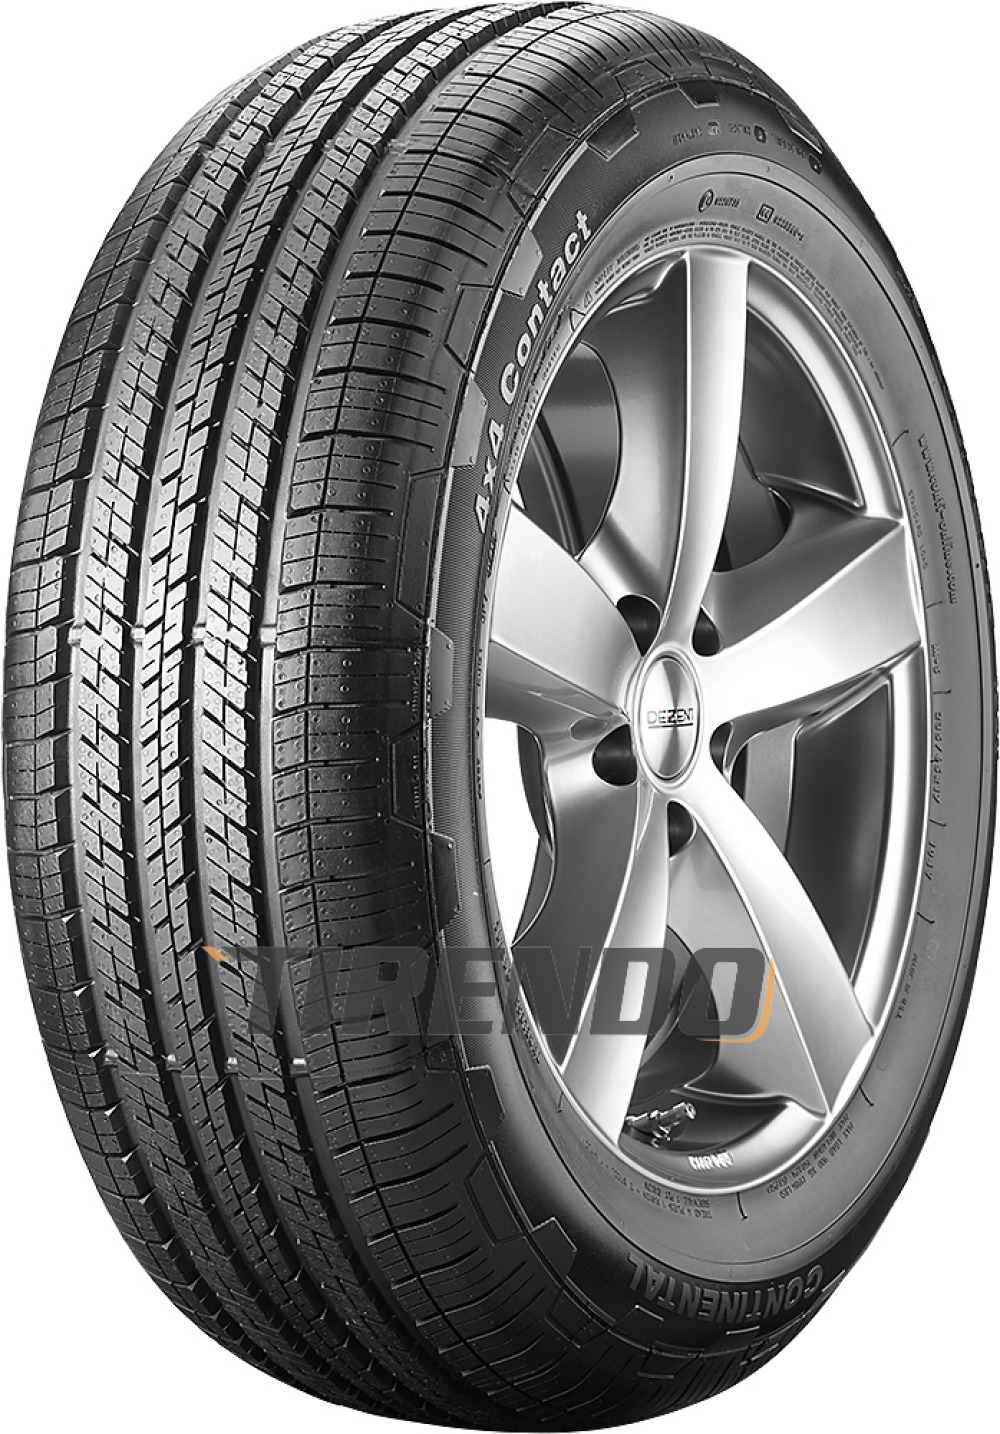 Continental 4X4 Contact ( 205/70 R15 96T )